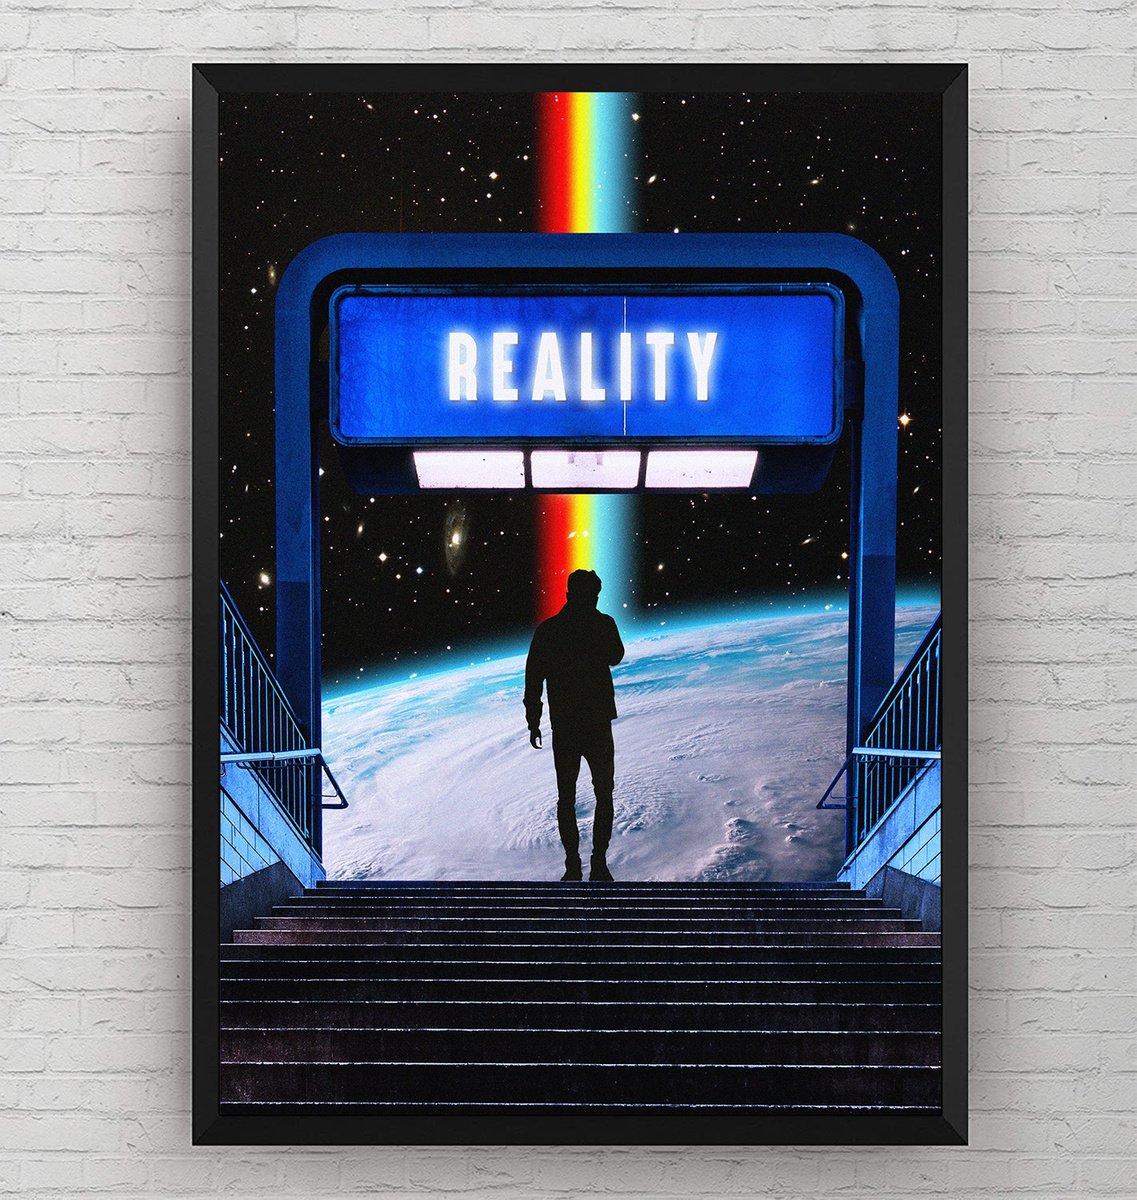 Welcome to Reality - LIMITED EDITION #50 by Darius Comi